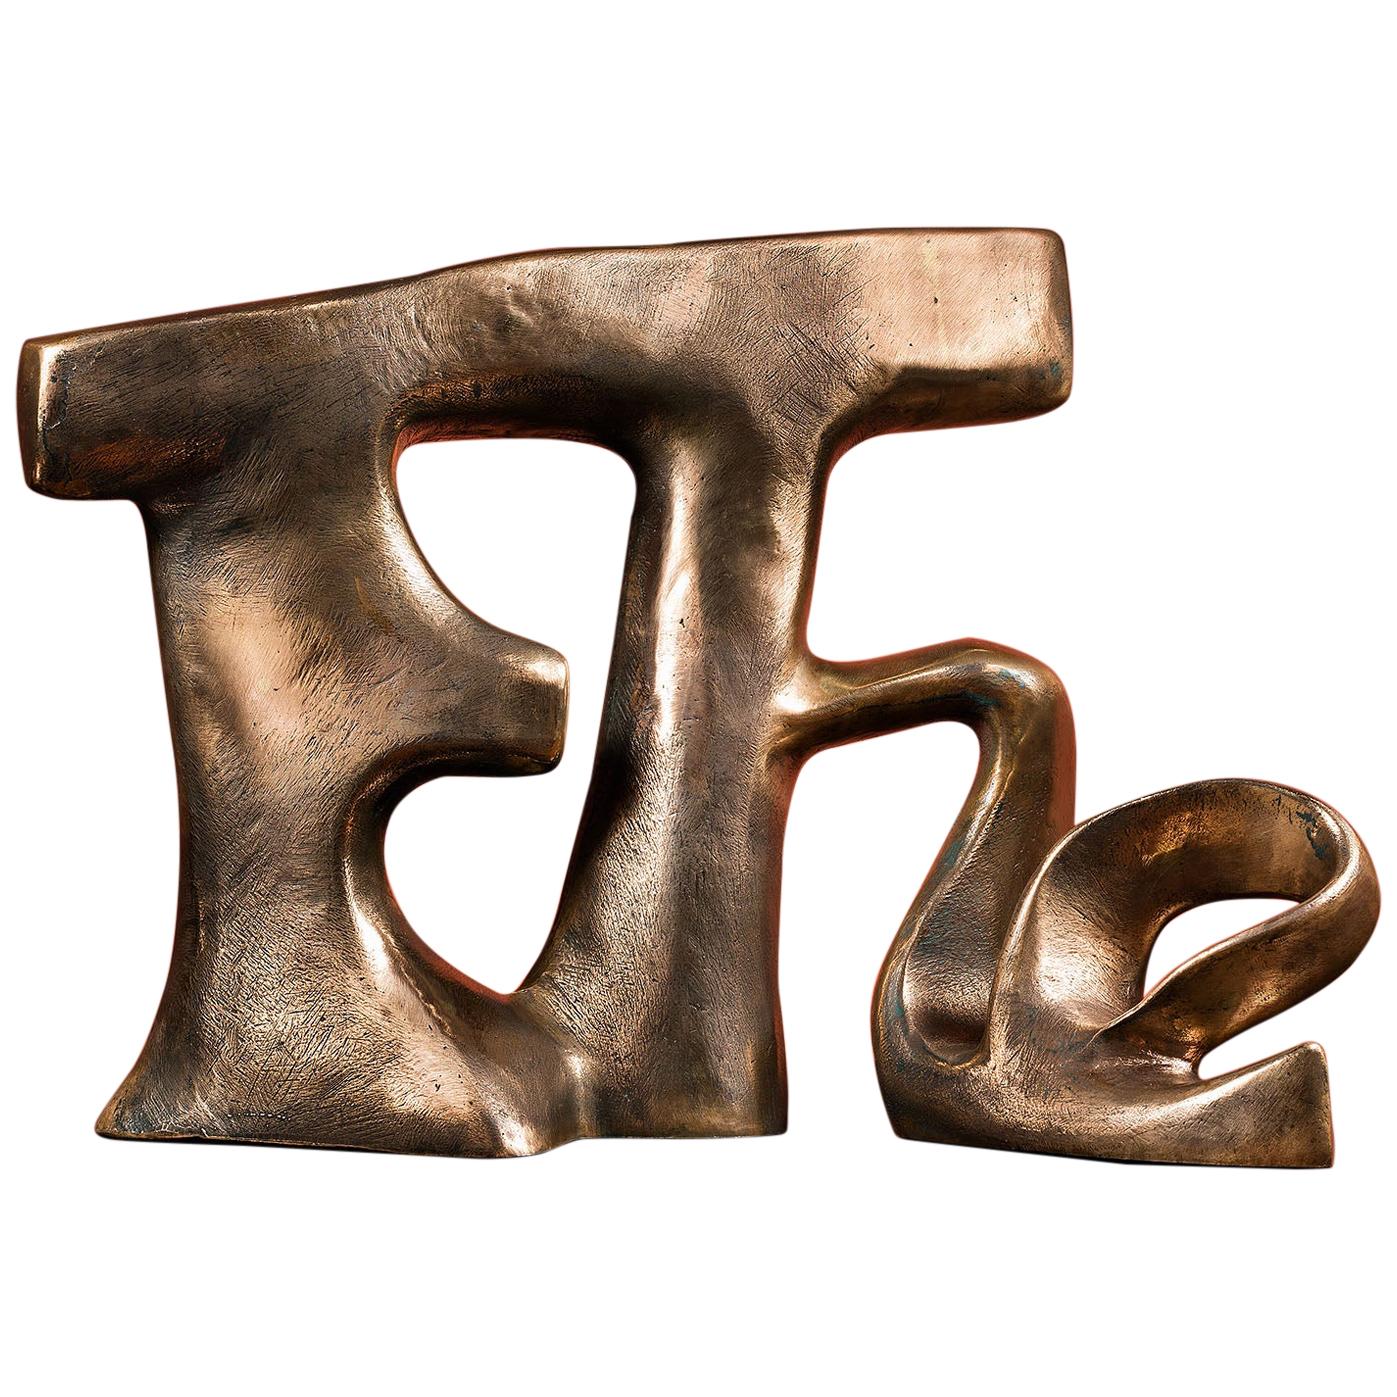 Bronze sculpture "Etre" 'to be' 1995, by Catherine Val For Sale